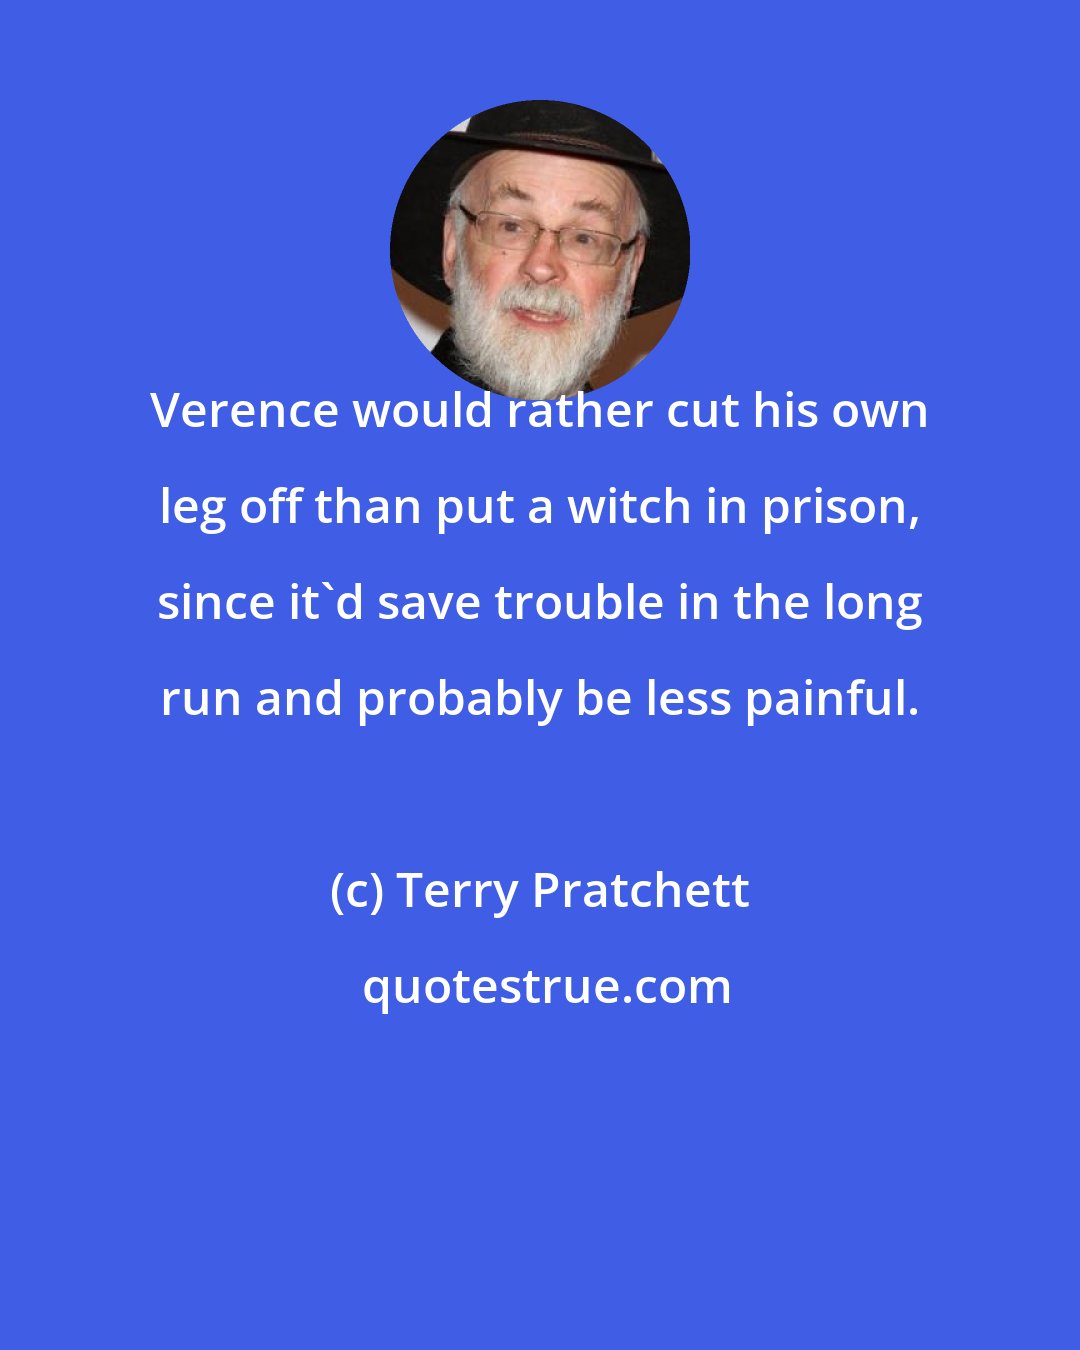 Terry Pratchett: Verence would rather cut his own leg off than put a witch in prison, since it'd save trouble in the long run and probably be less painful.